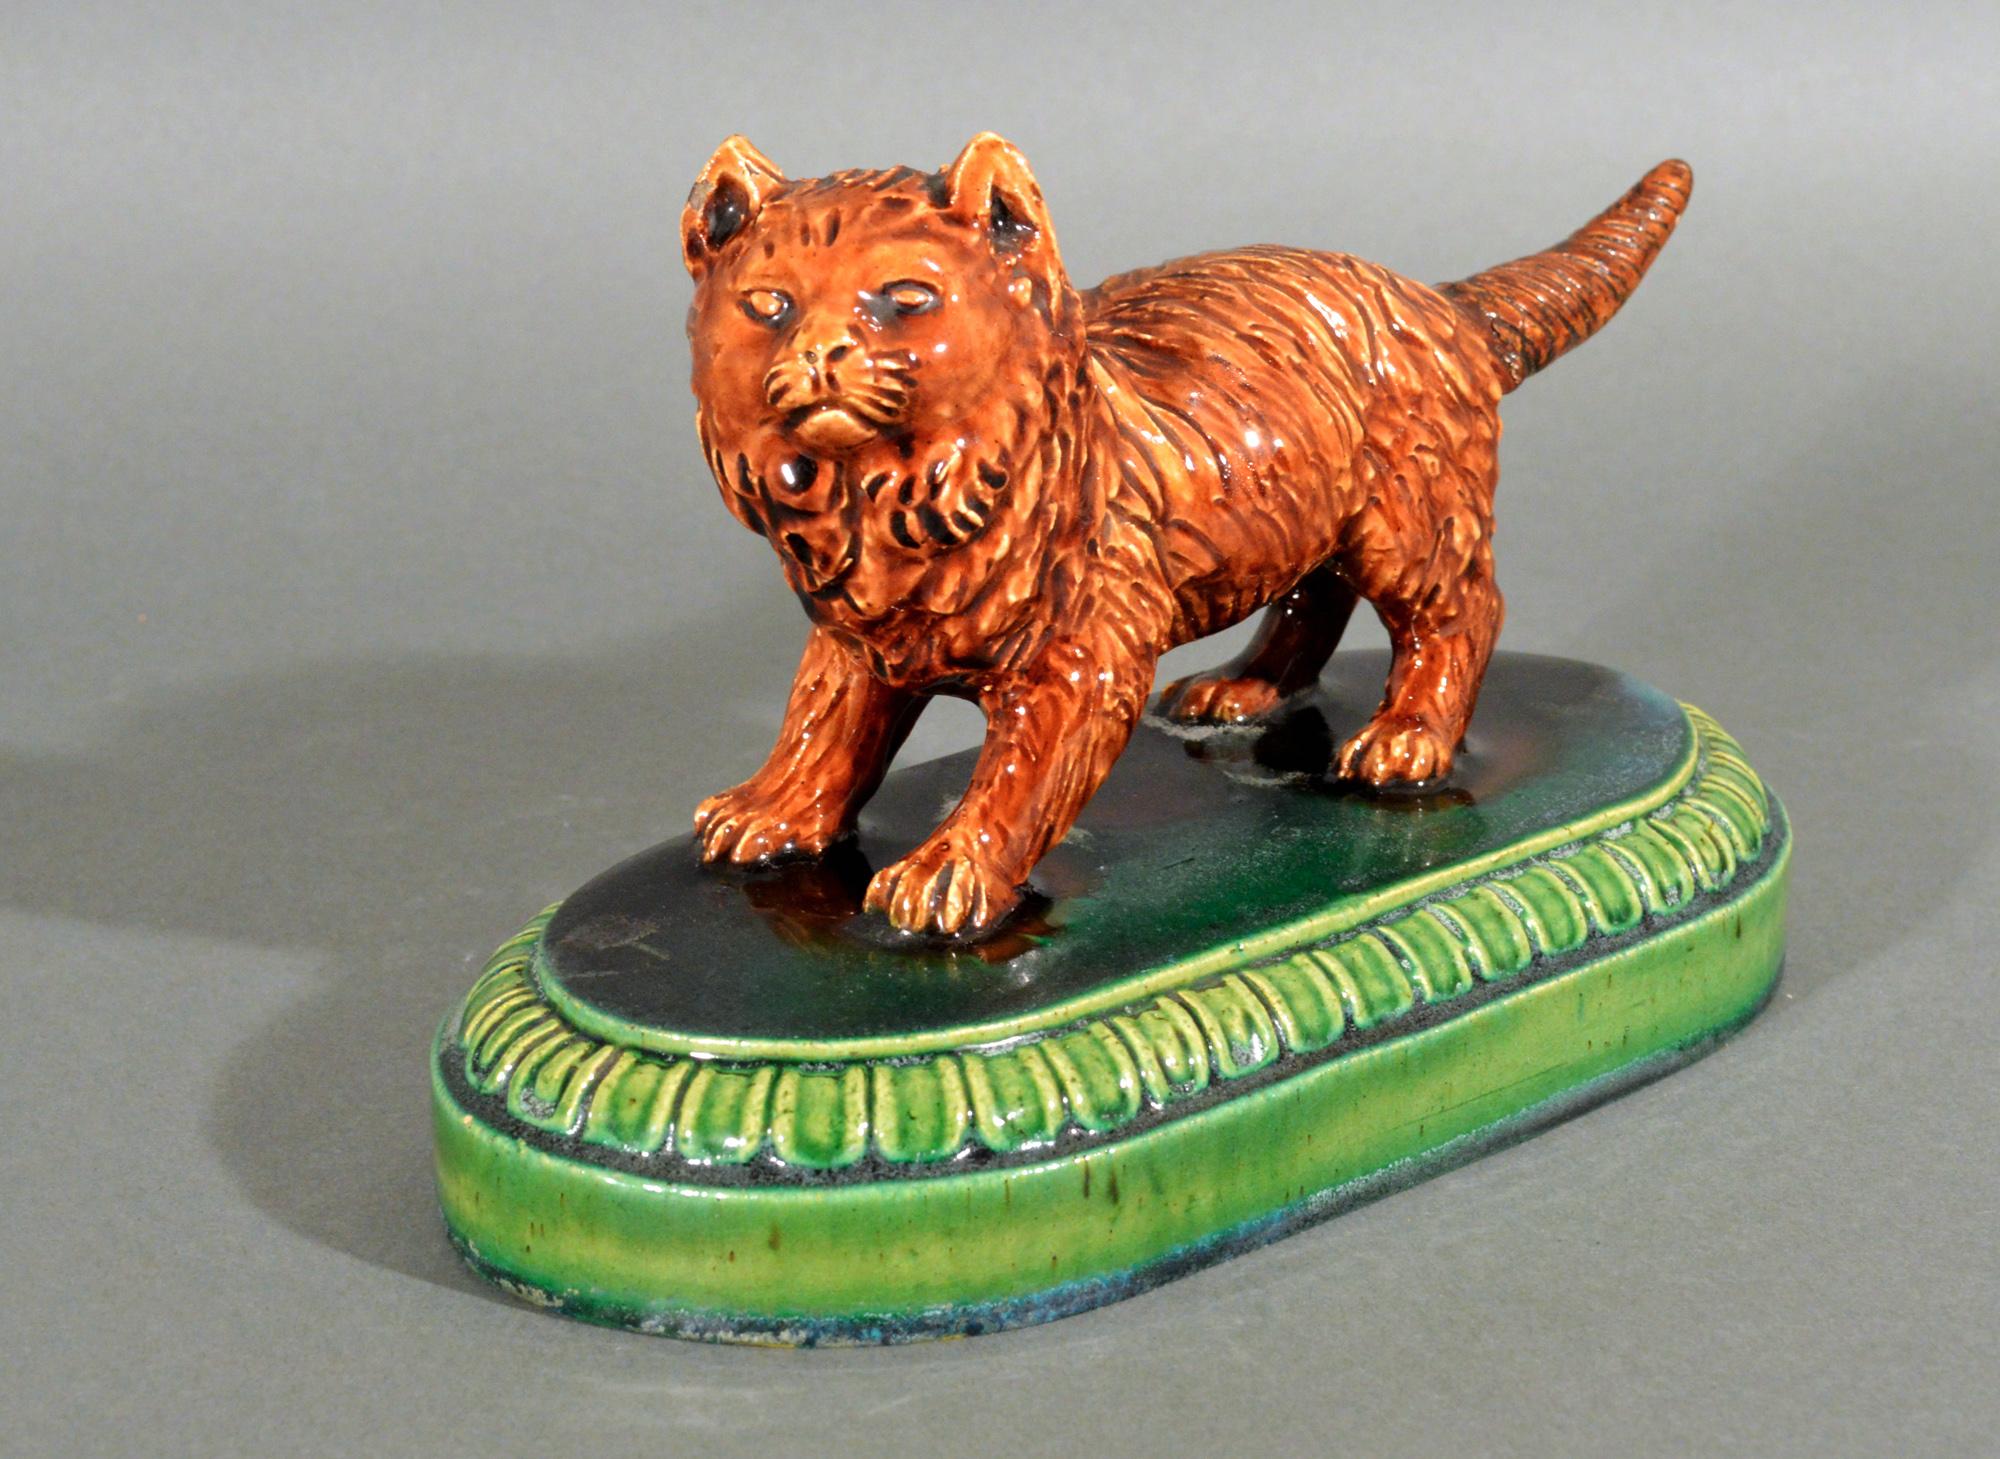 Victorian Majolica Earthenware Model of a Cat, Possibly William Brownfield For Sale